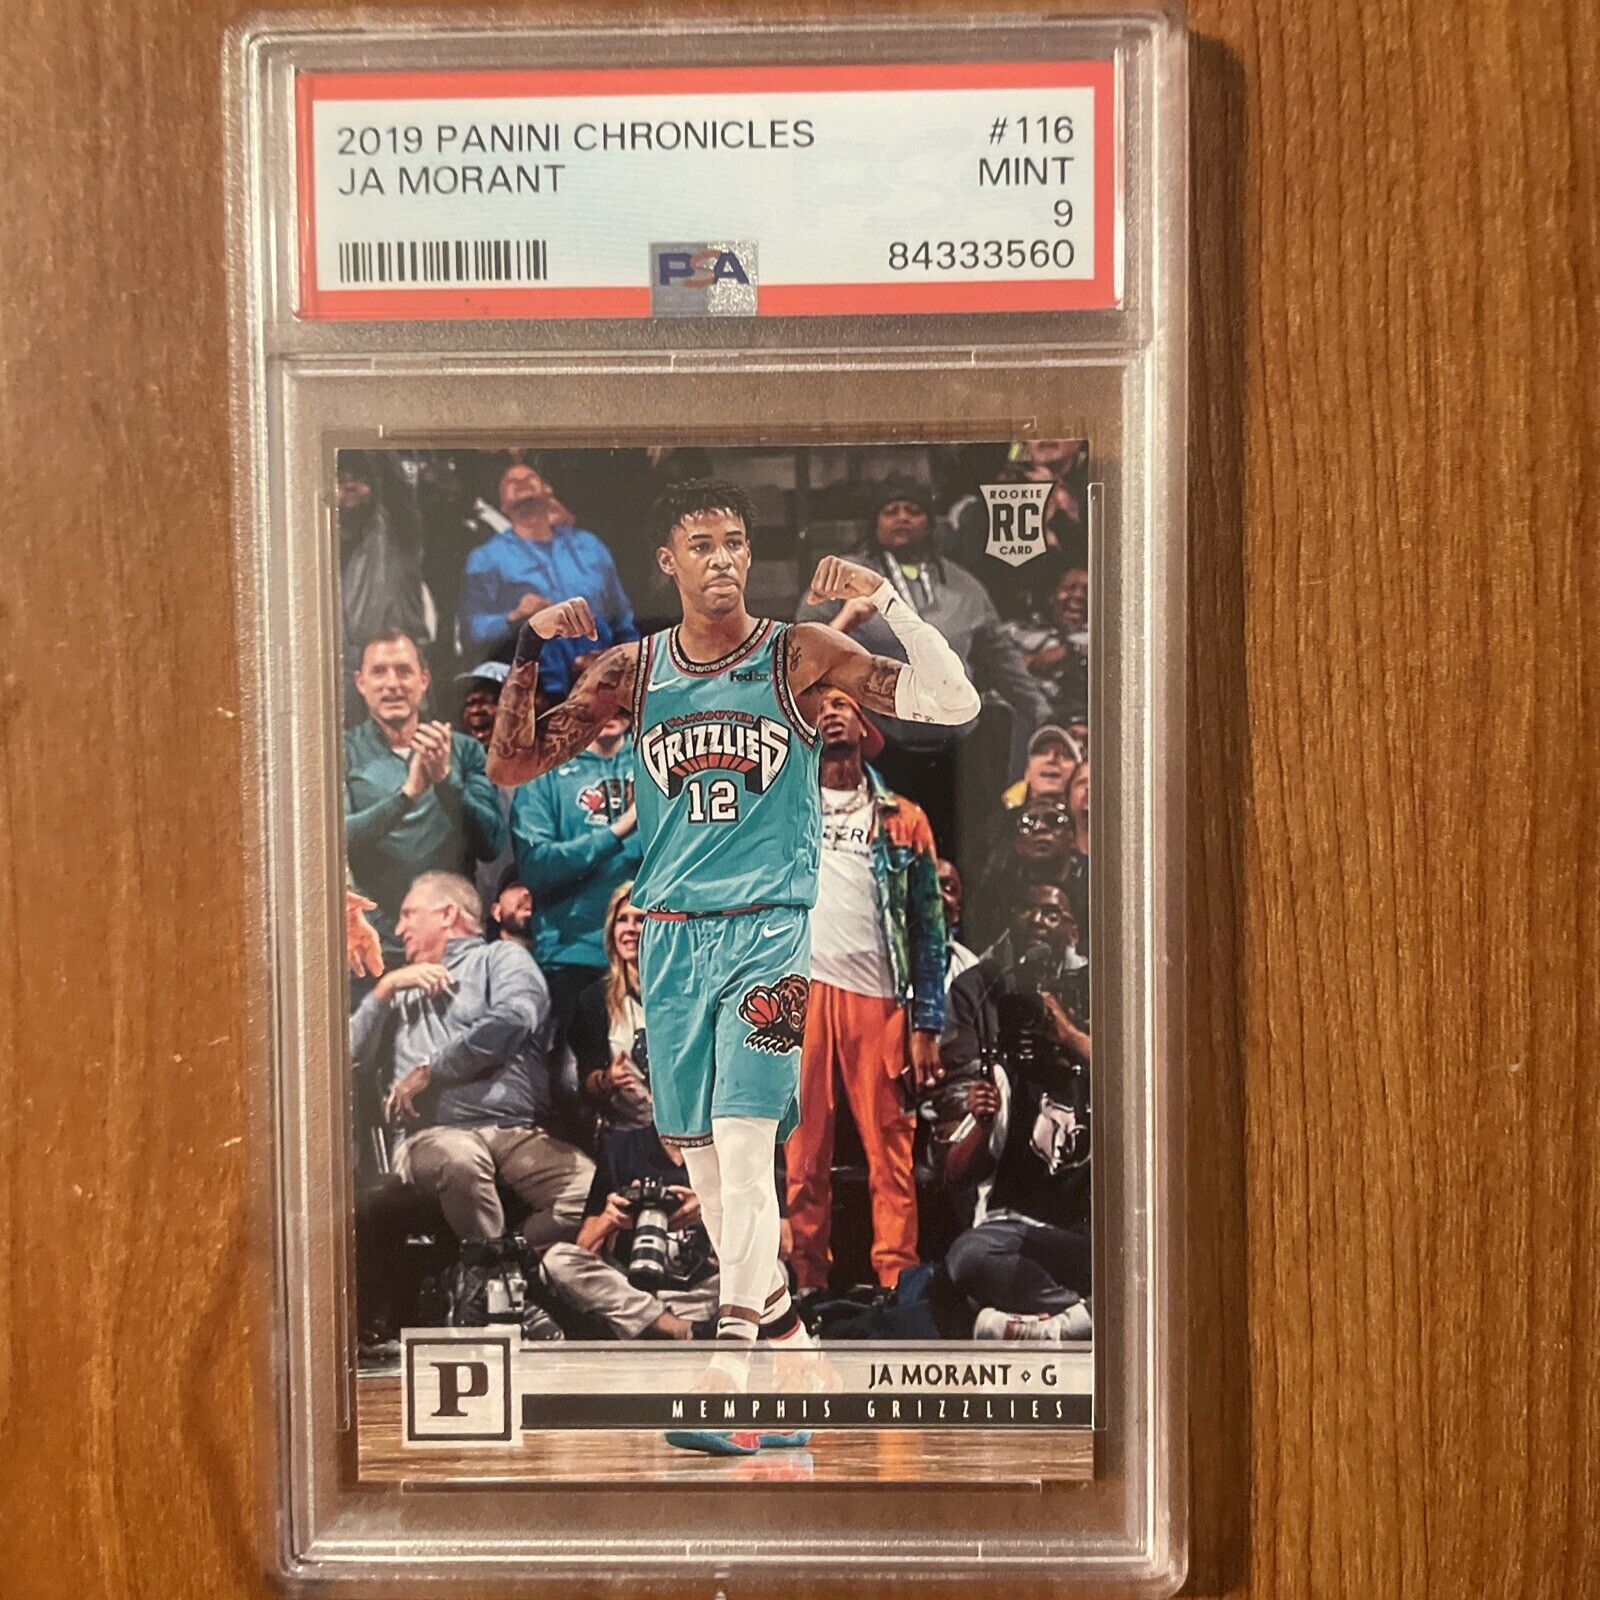 2019 Panini Chronicles Ja Morant PSA 9 #116 Young Dolph/Tuohy RC Rookie